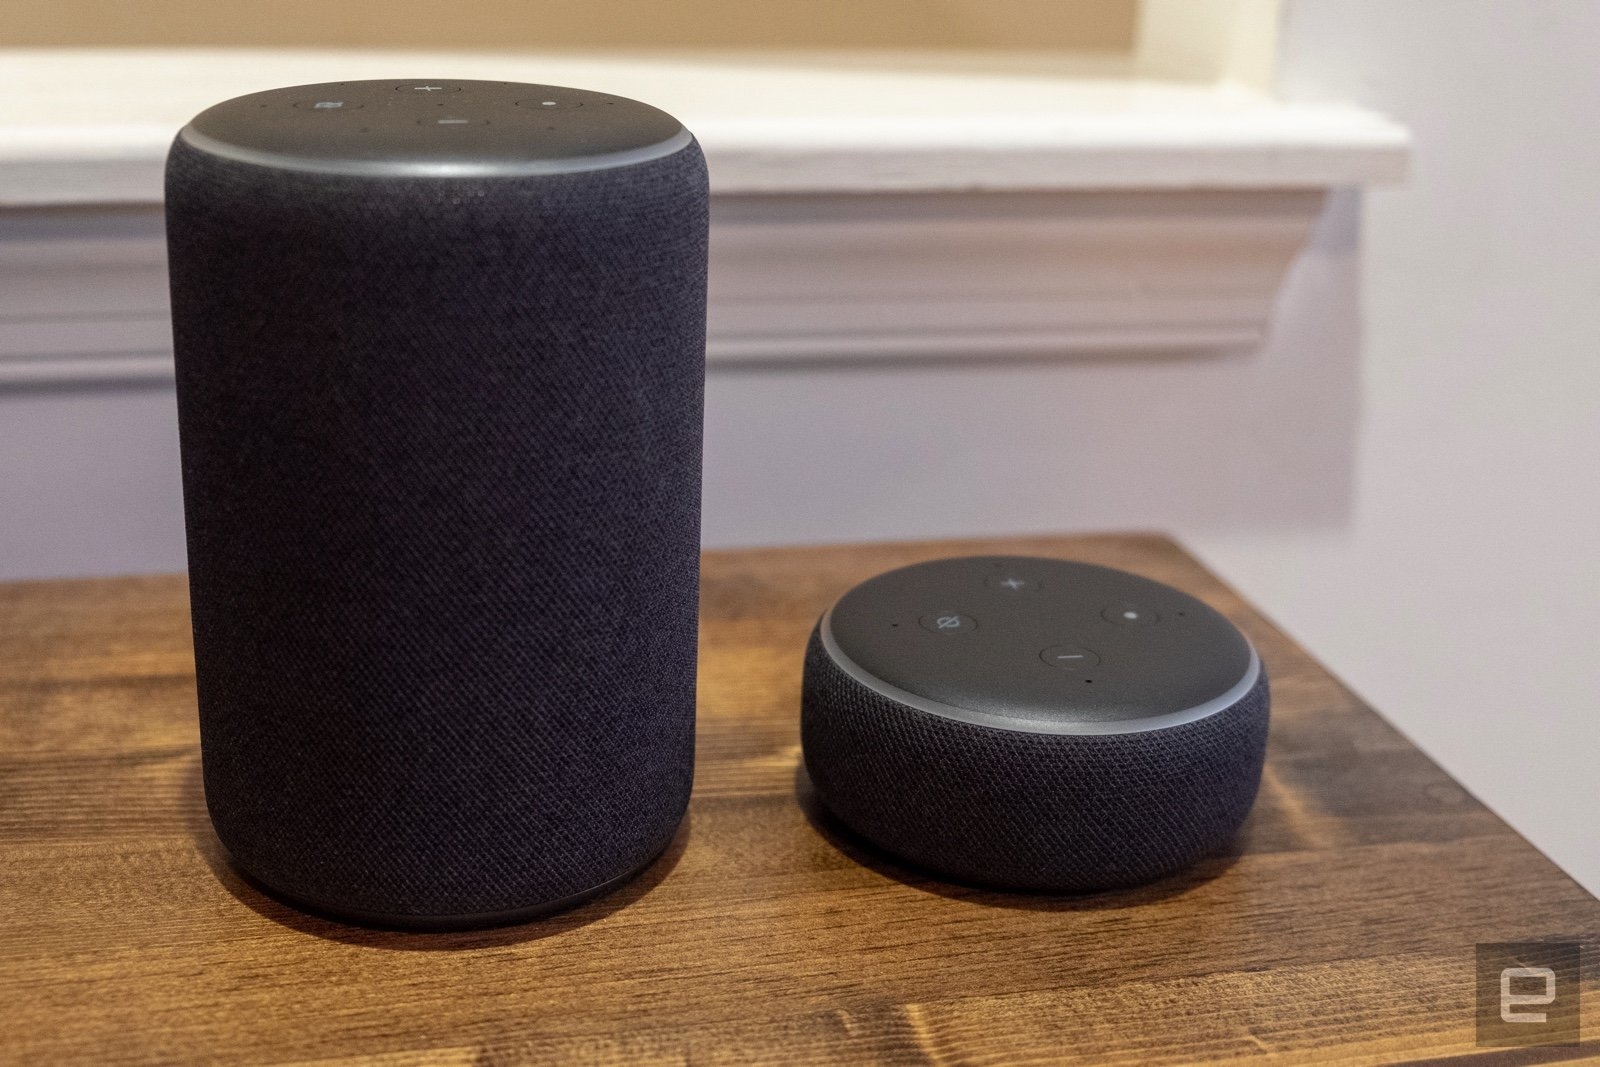 Alexa's new skill lets you scour Ticketmaster using your voice | DeviceDaily.com